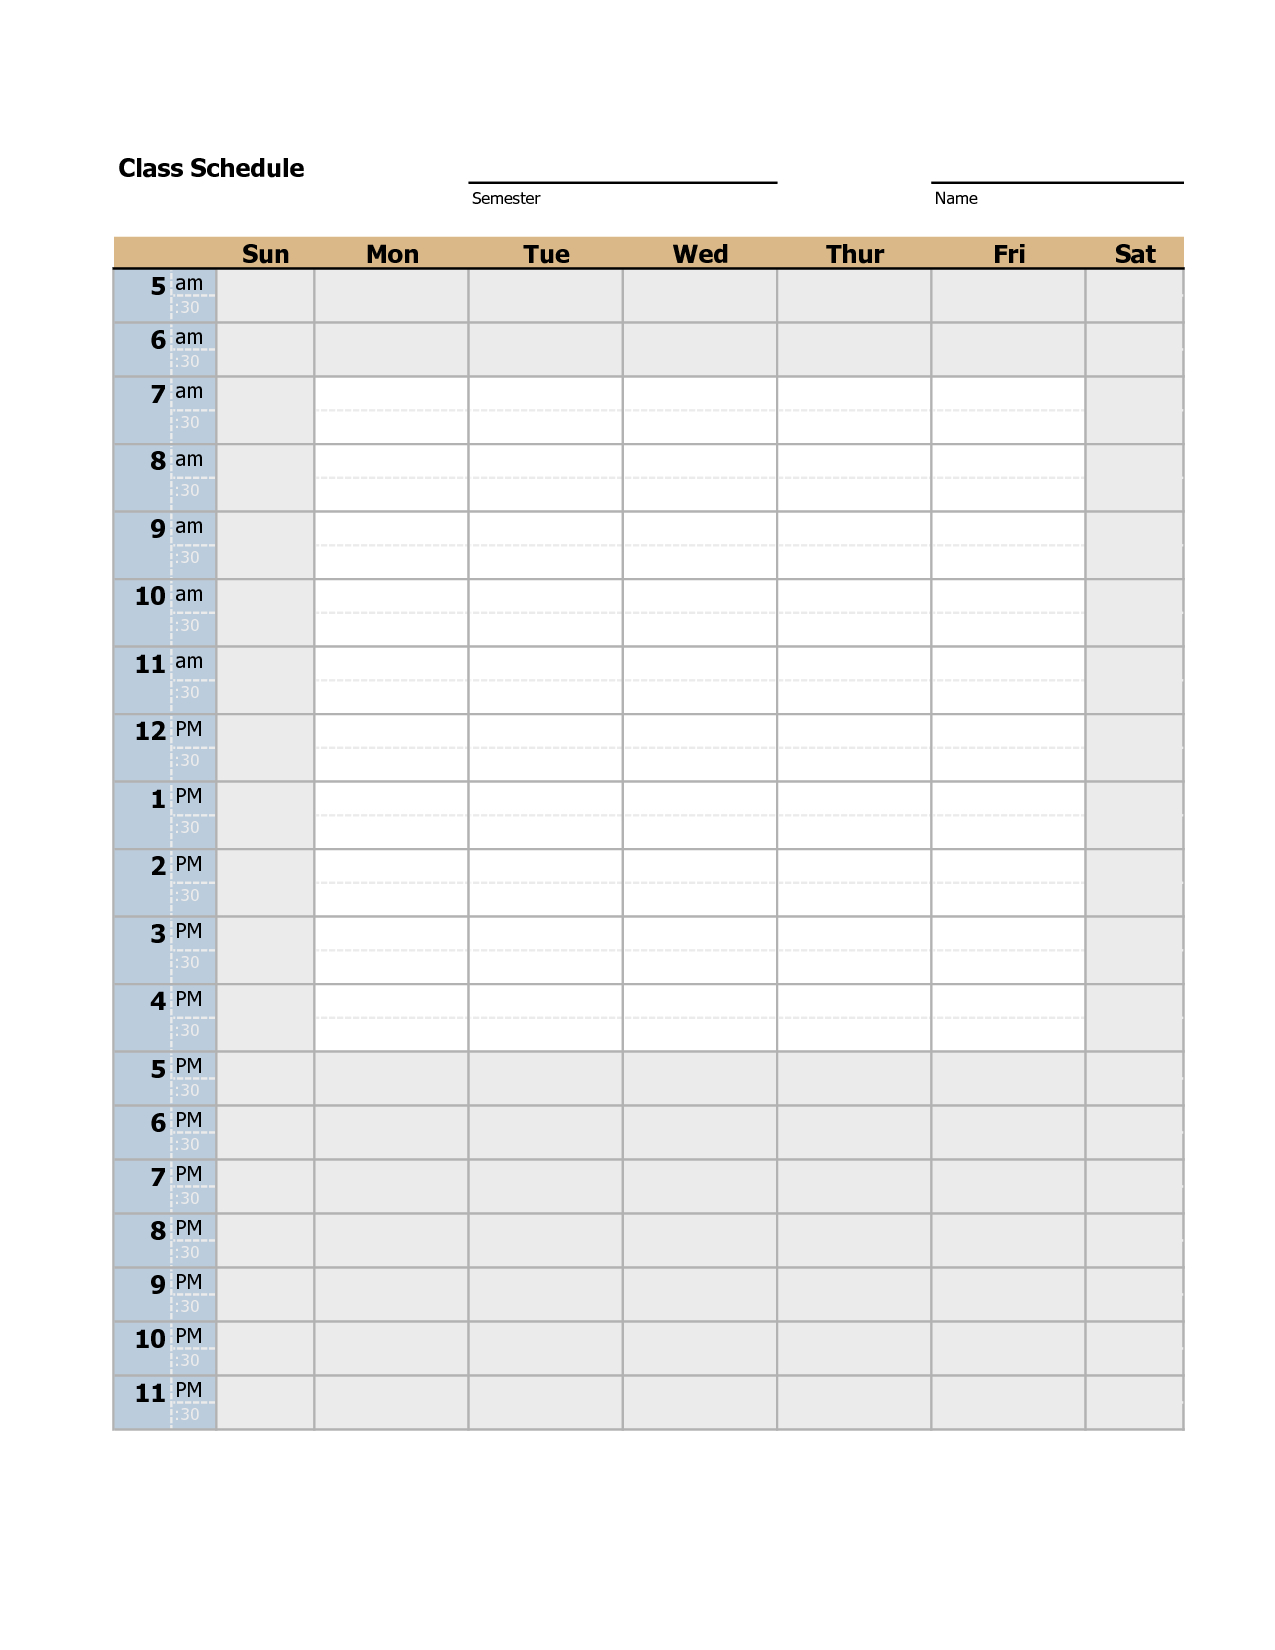 Free Blank Class Roster Printable | Class Schedule Template with Blank Class Schedule Template